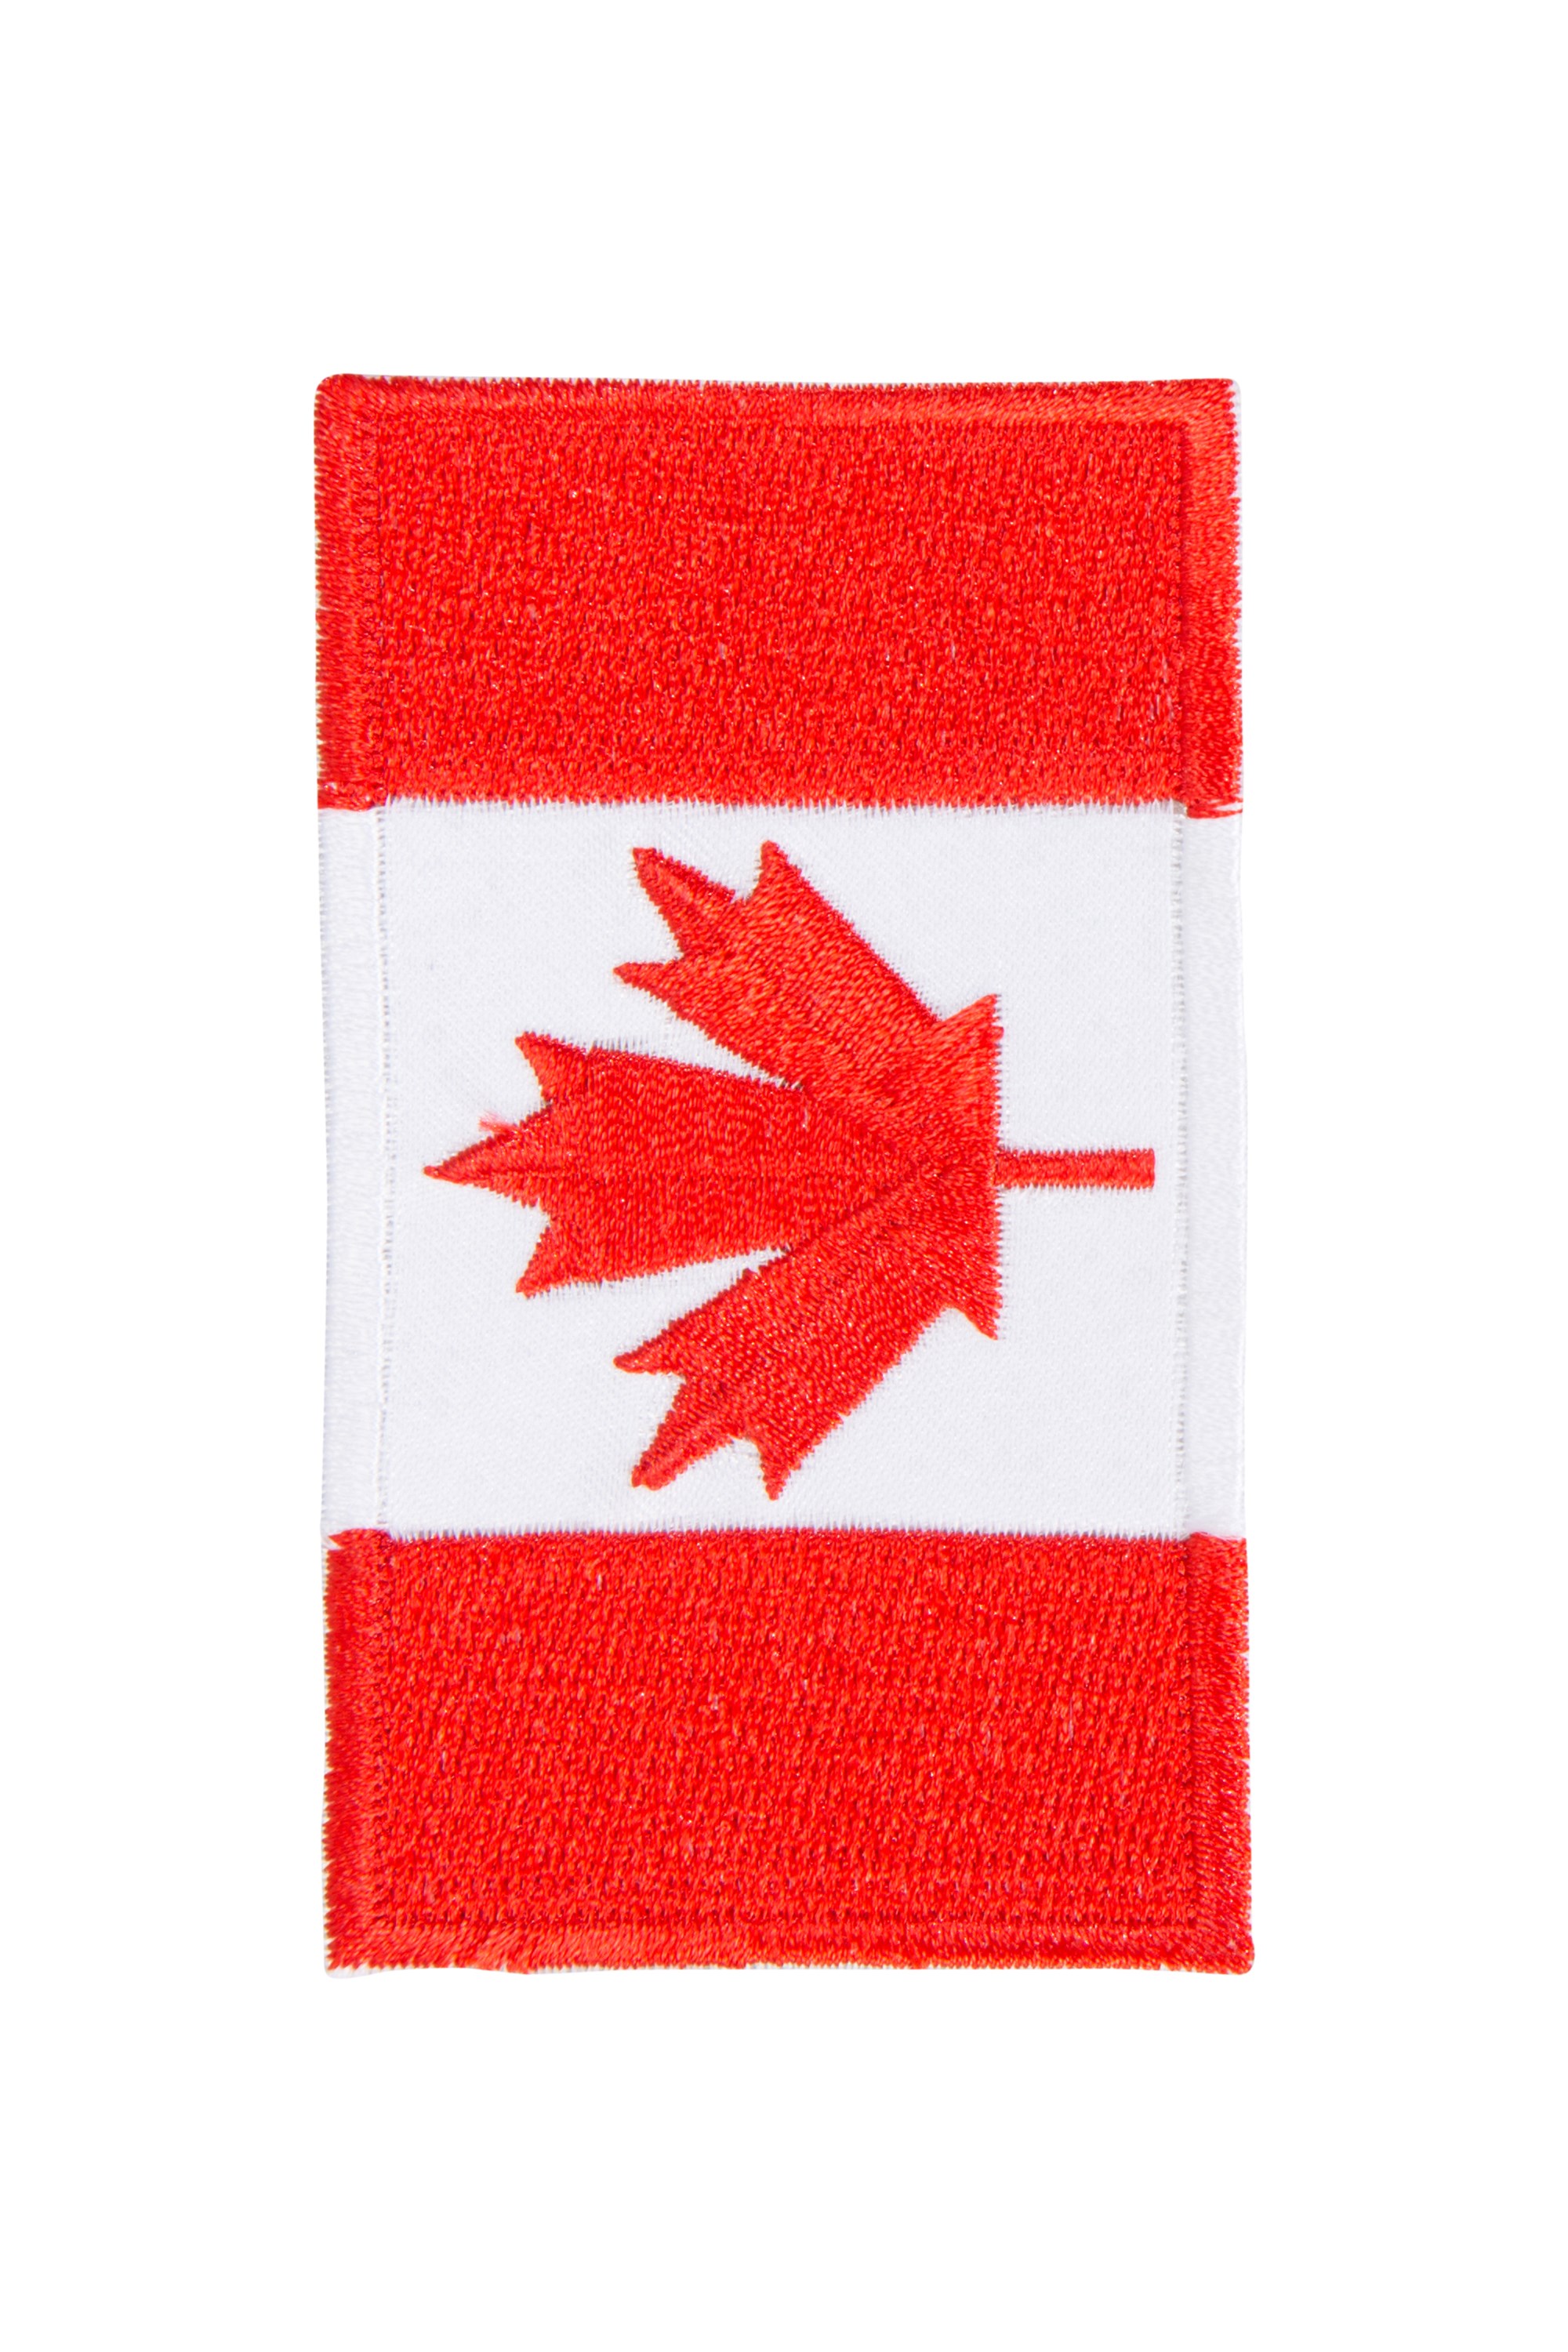 Mountain Warehouse Canadian Flag Iron On Patch 8cm x 5cm Red